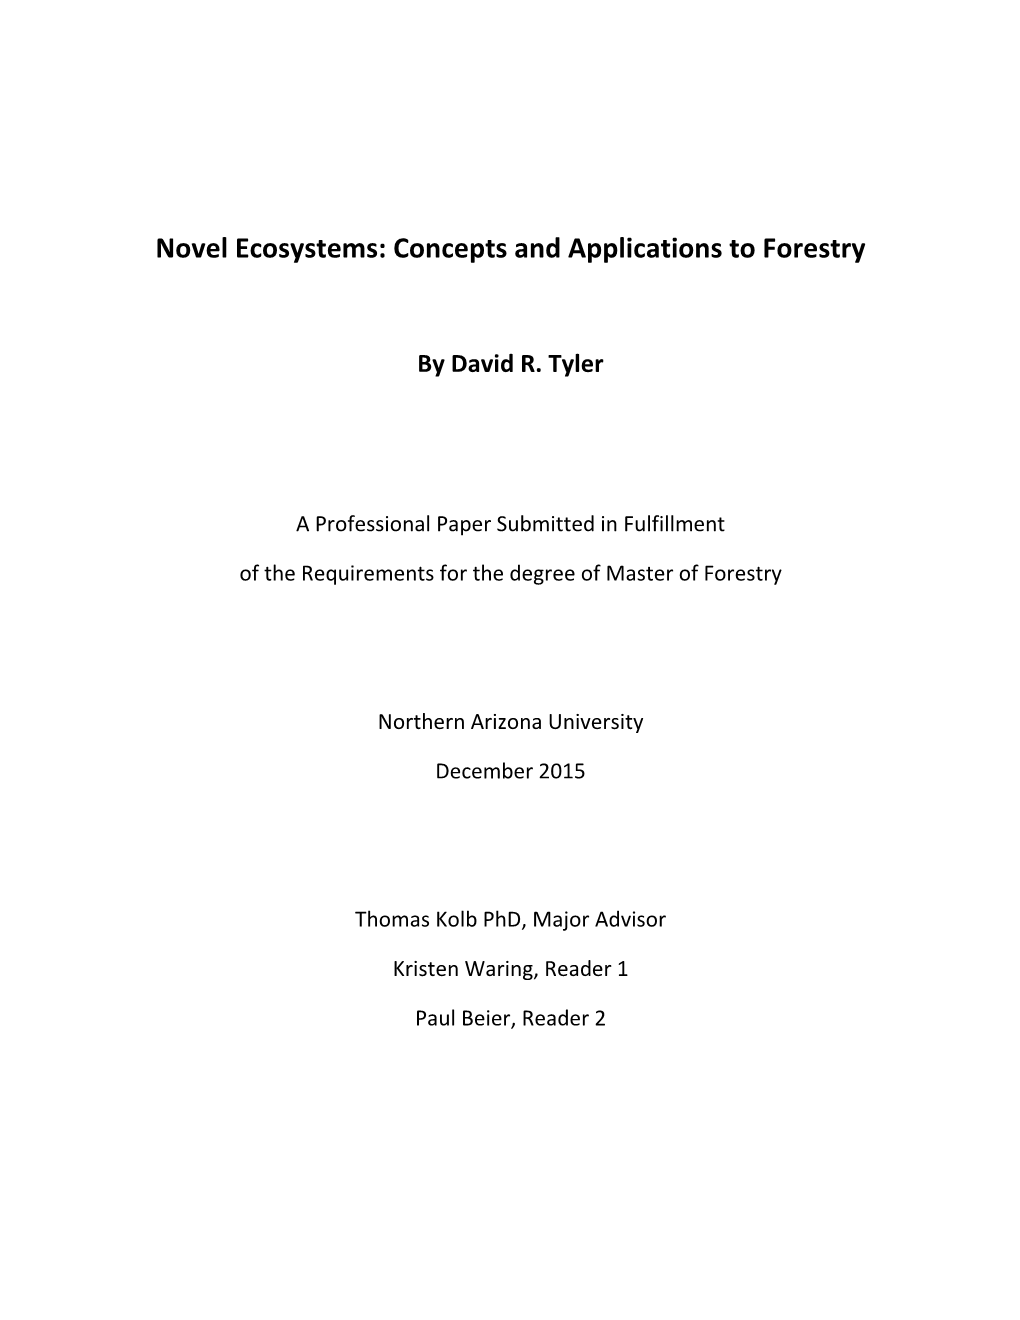 Novel Ecosystems: Concepts and Applications to Forestry